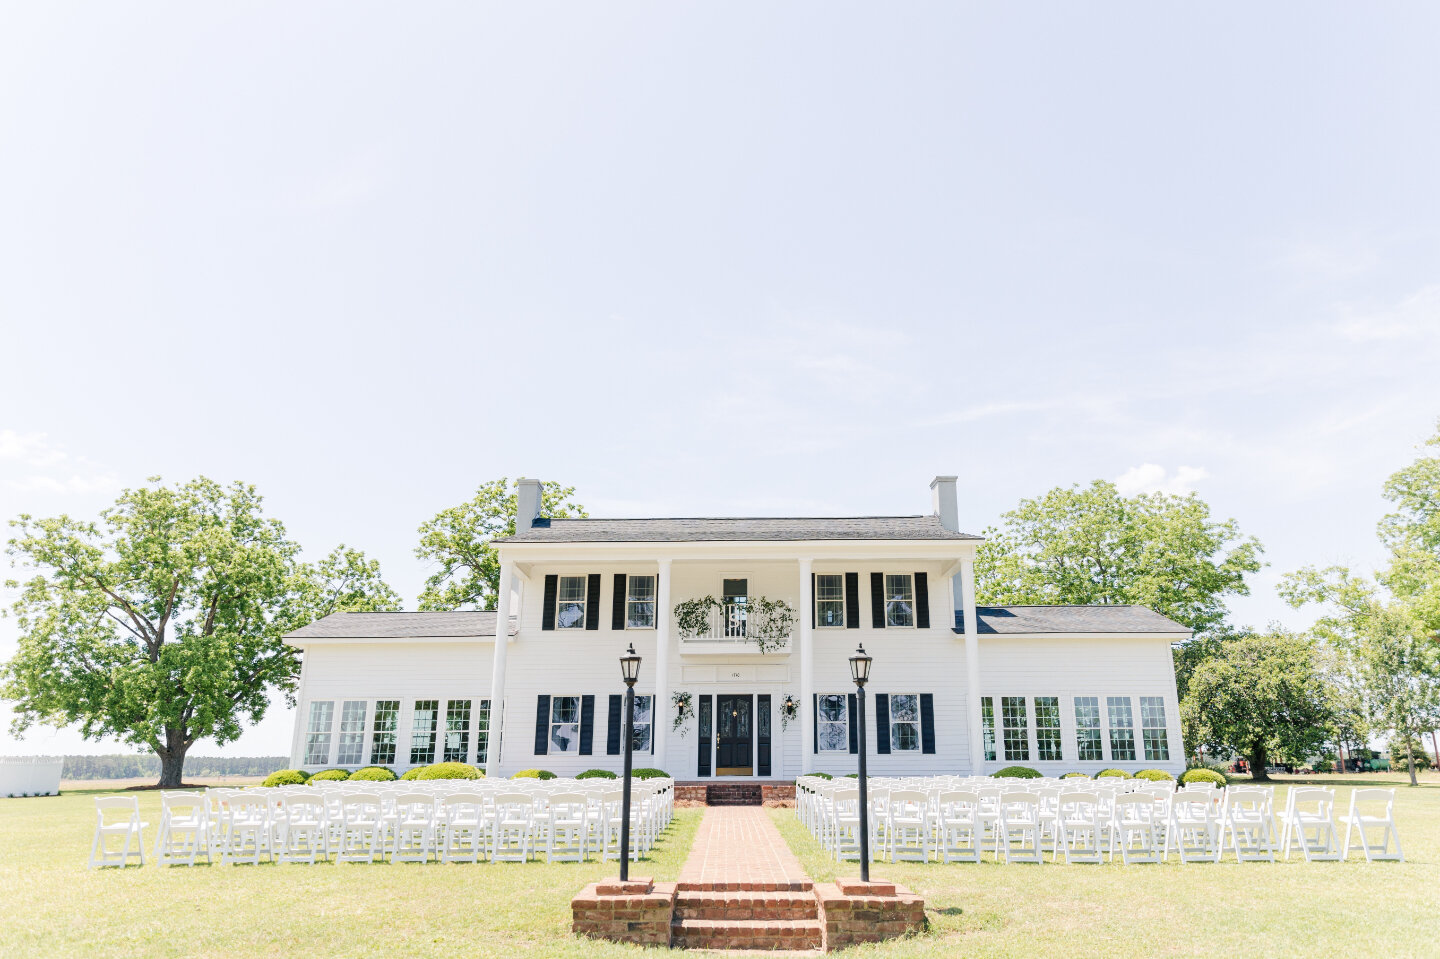 Escape to a destination of love and enchantment! ✈️💍 Dutch Ford Farm offers the perfect backdrop for your dream south country destination wedding, where every moment feels like a fairytale come true. It&rsquo;s time to plan your magical getaway!
📸P